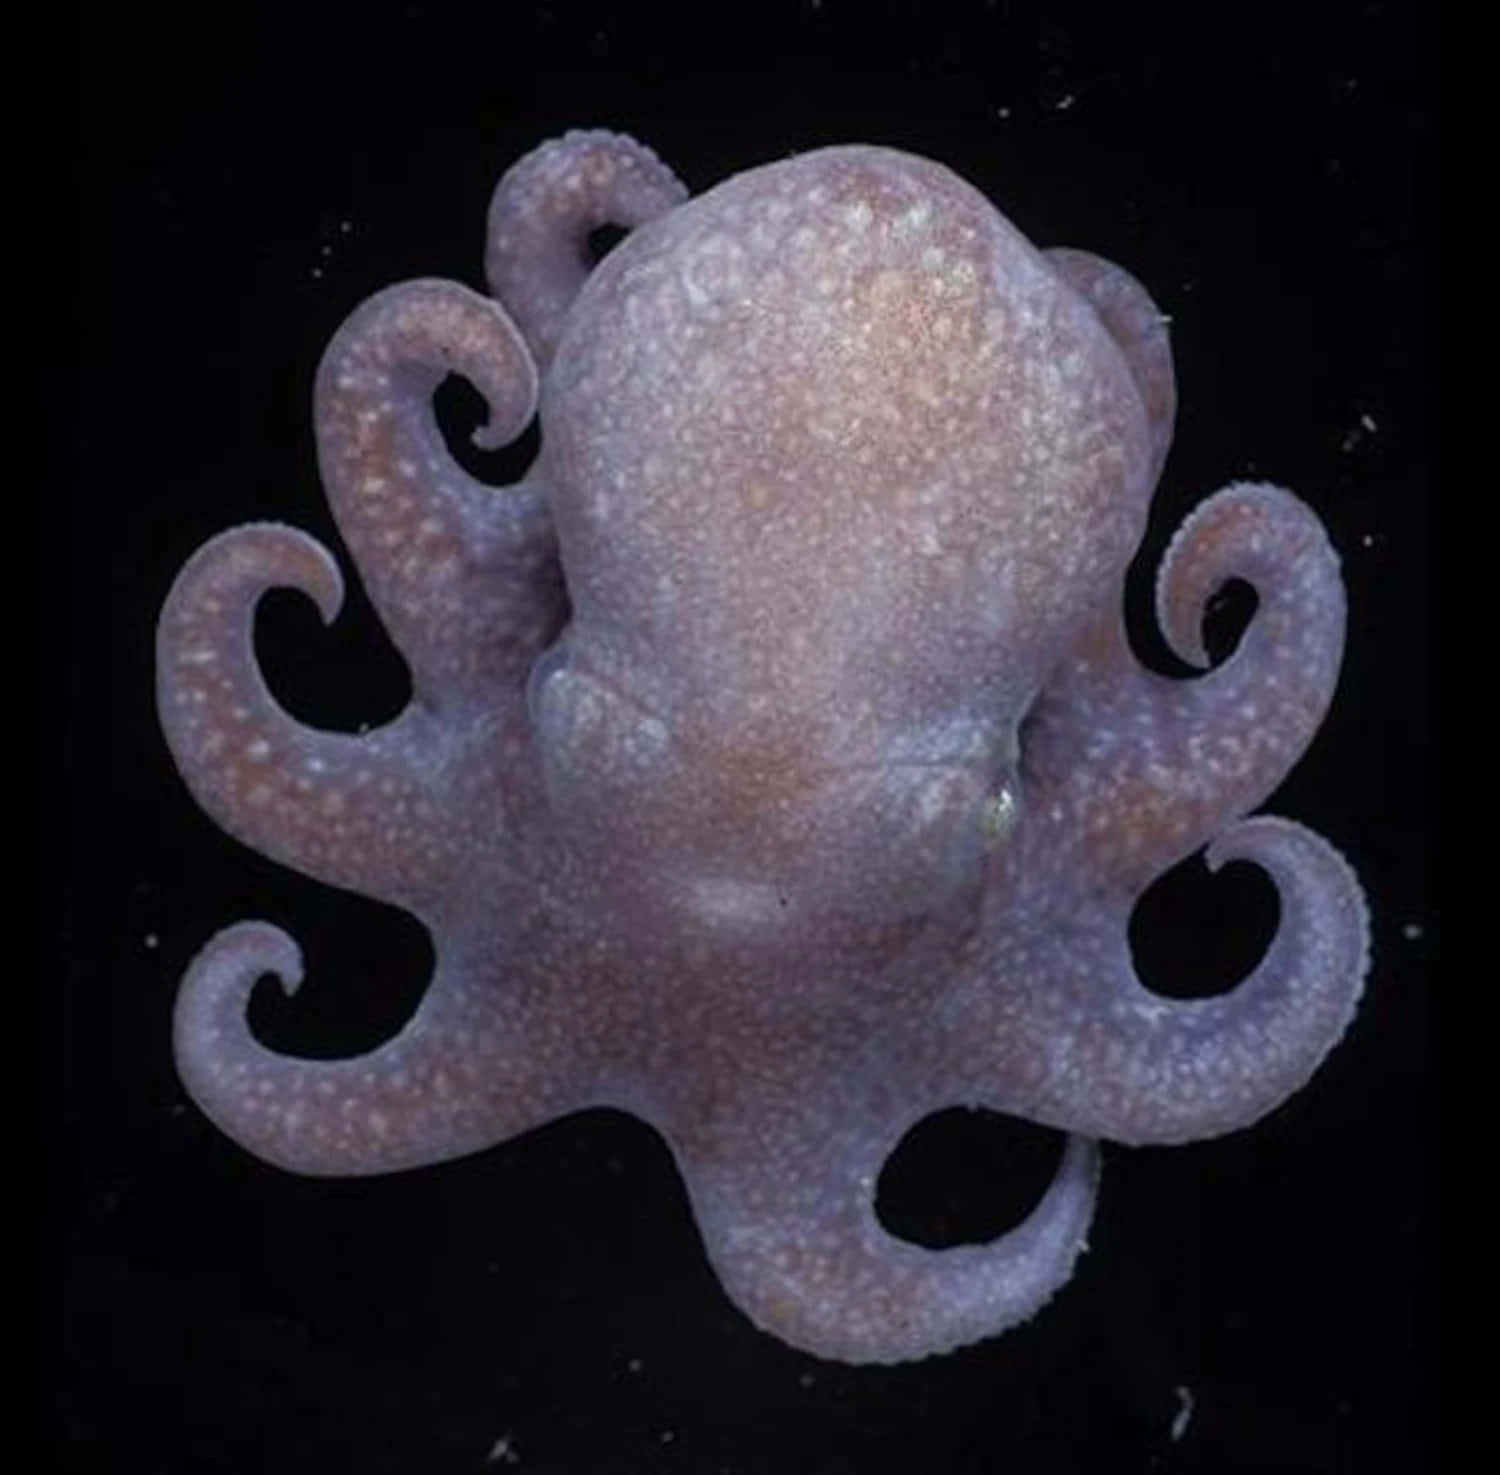 Marvel at the Splendor of this Octopus